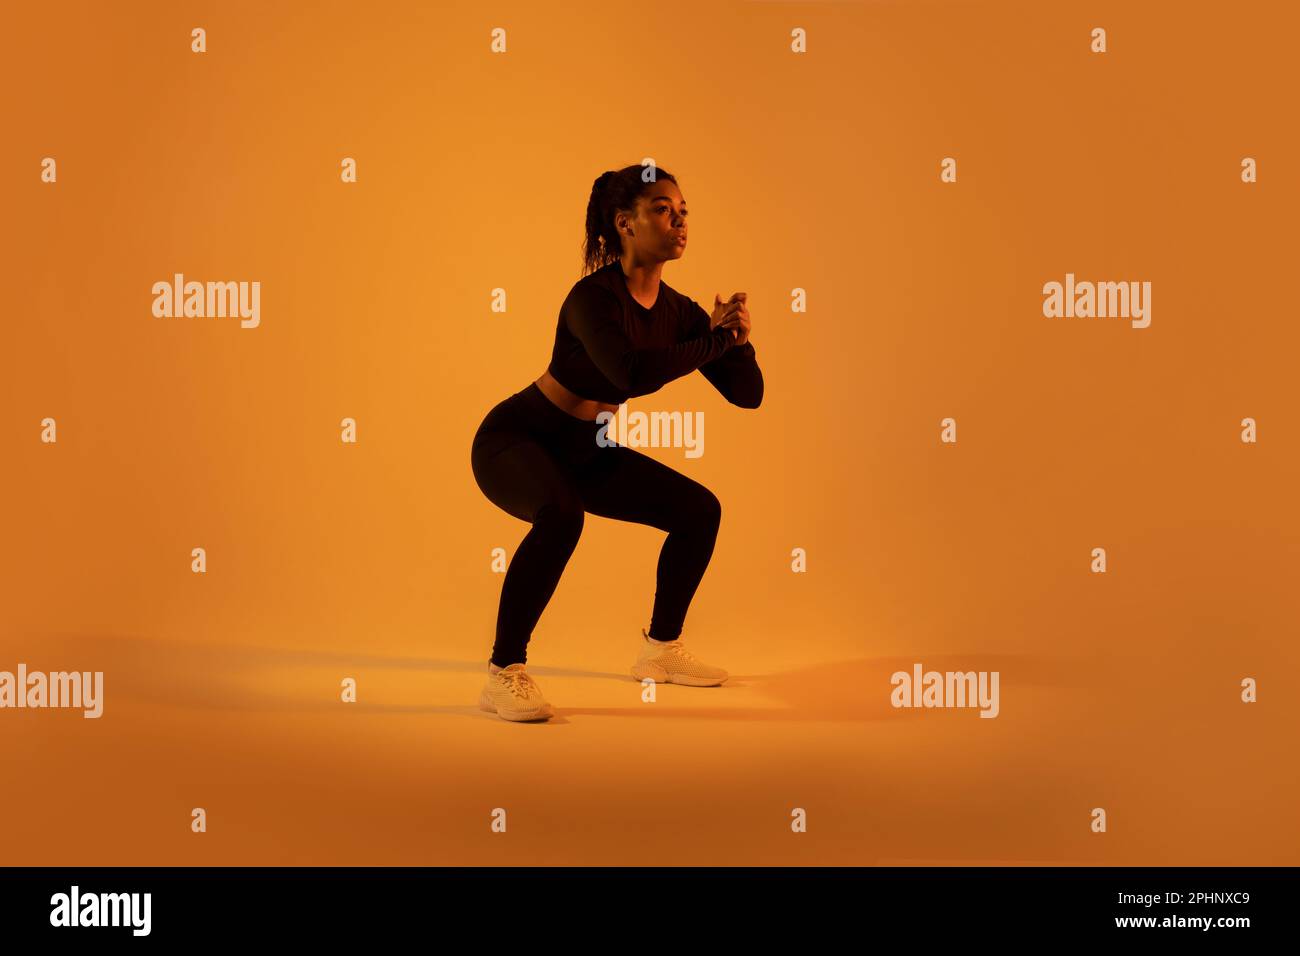 Workout and fitness. Sporty black woman doing deep squat flexing muscles exercising over orange neon background Stock Photo